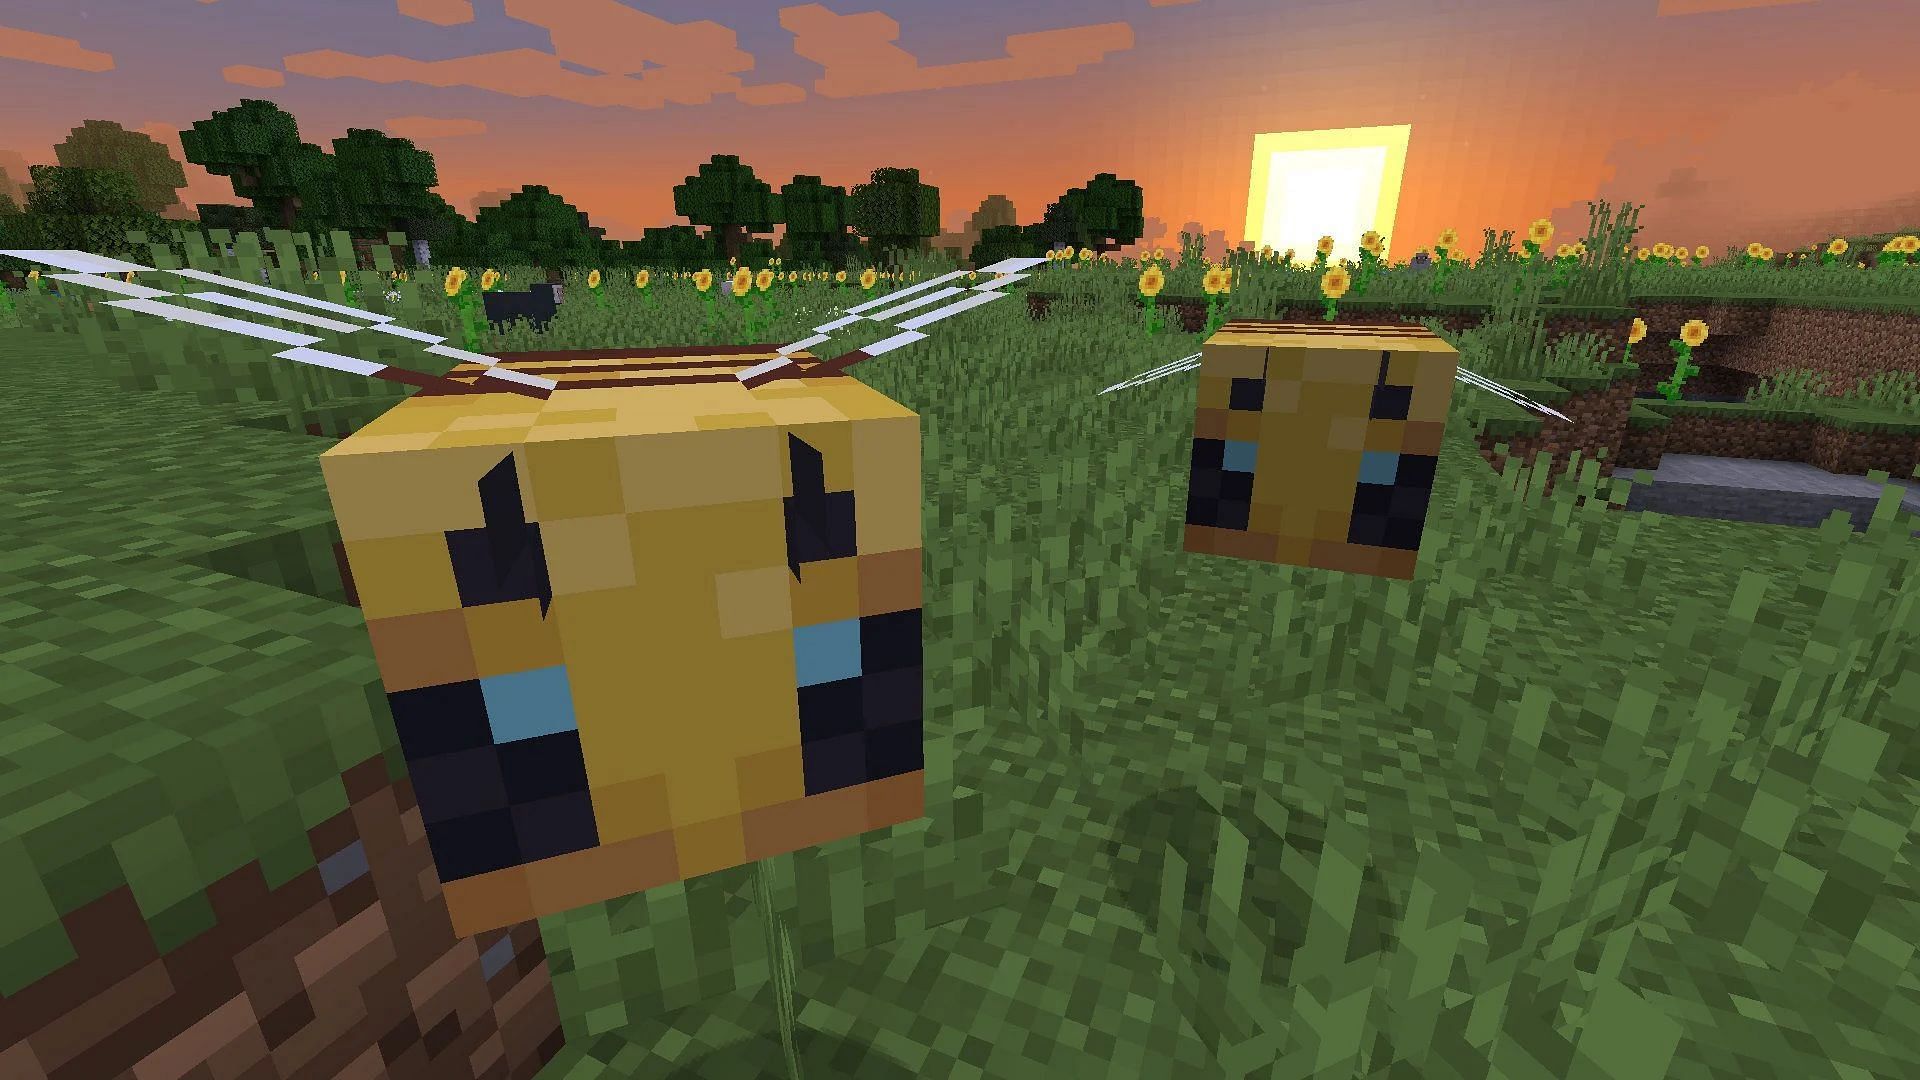 A couple of bees flying through plains (Image via Minecraft)